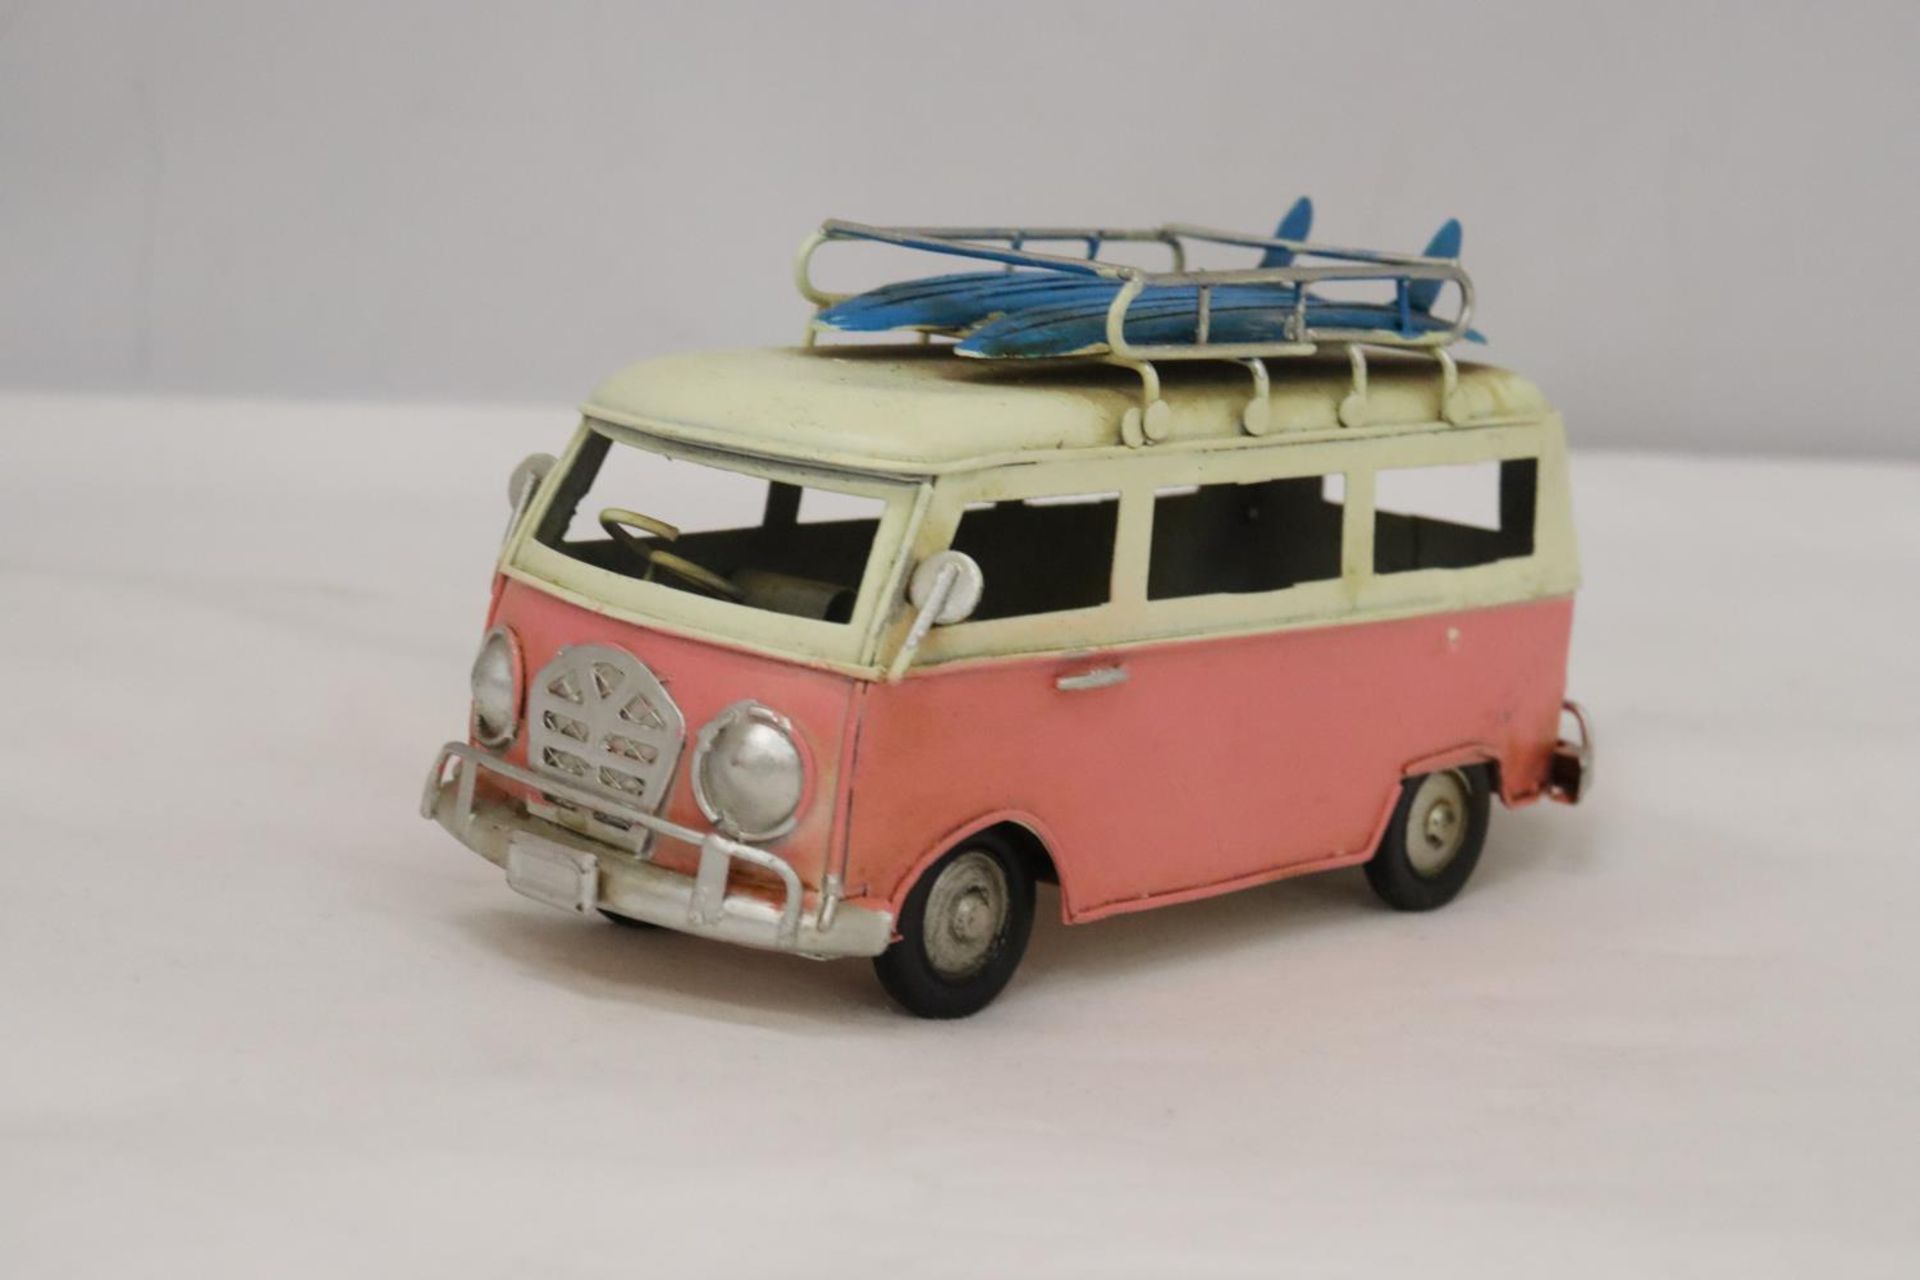 A TIN PLATE VOLKSWAGON SURFING CAMPER VAN - Image 2 of 6